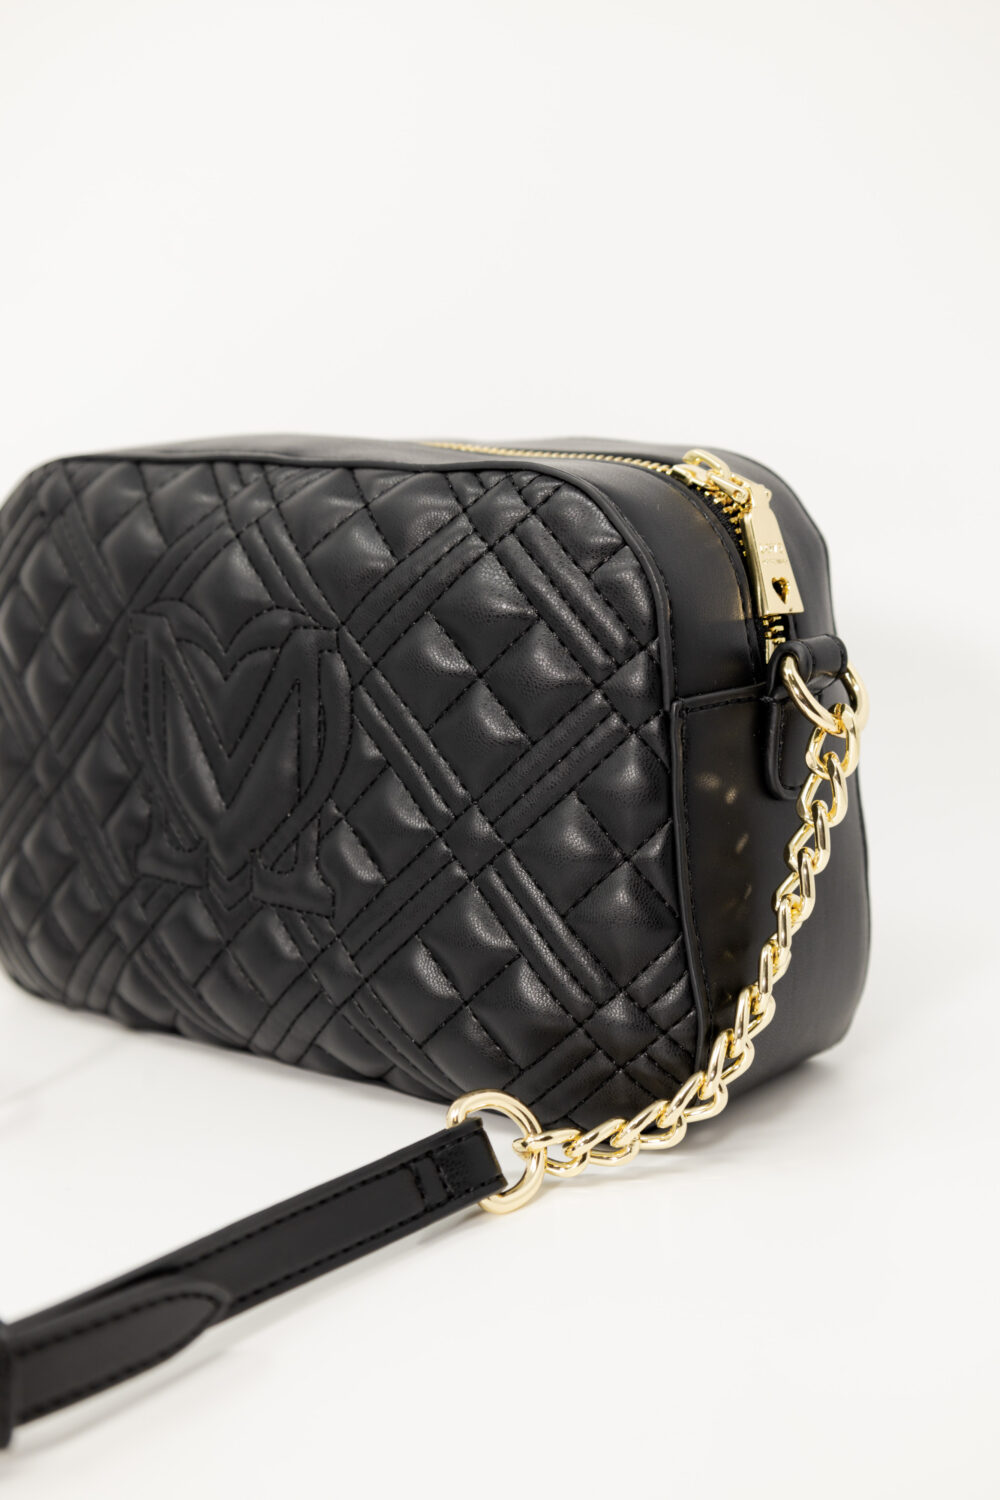 Borsa Love Moschino QUILTED Black gold - Foto 5